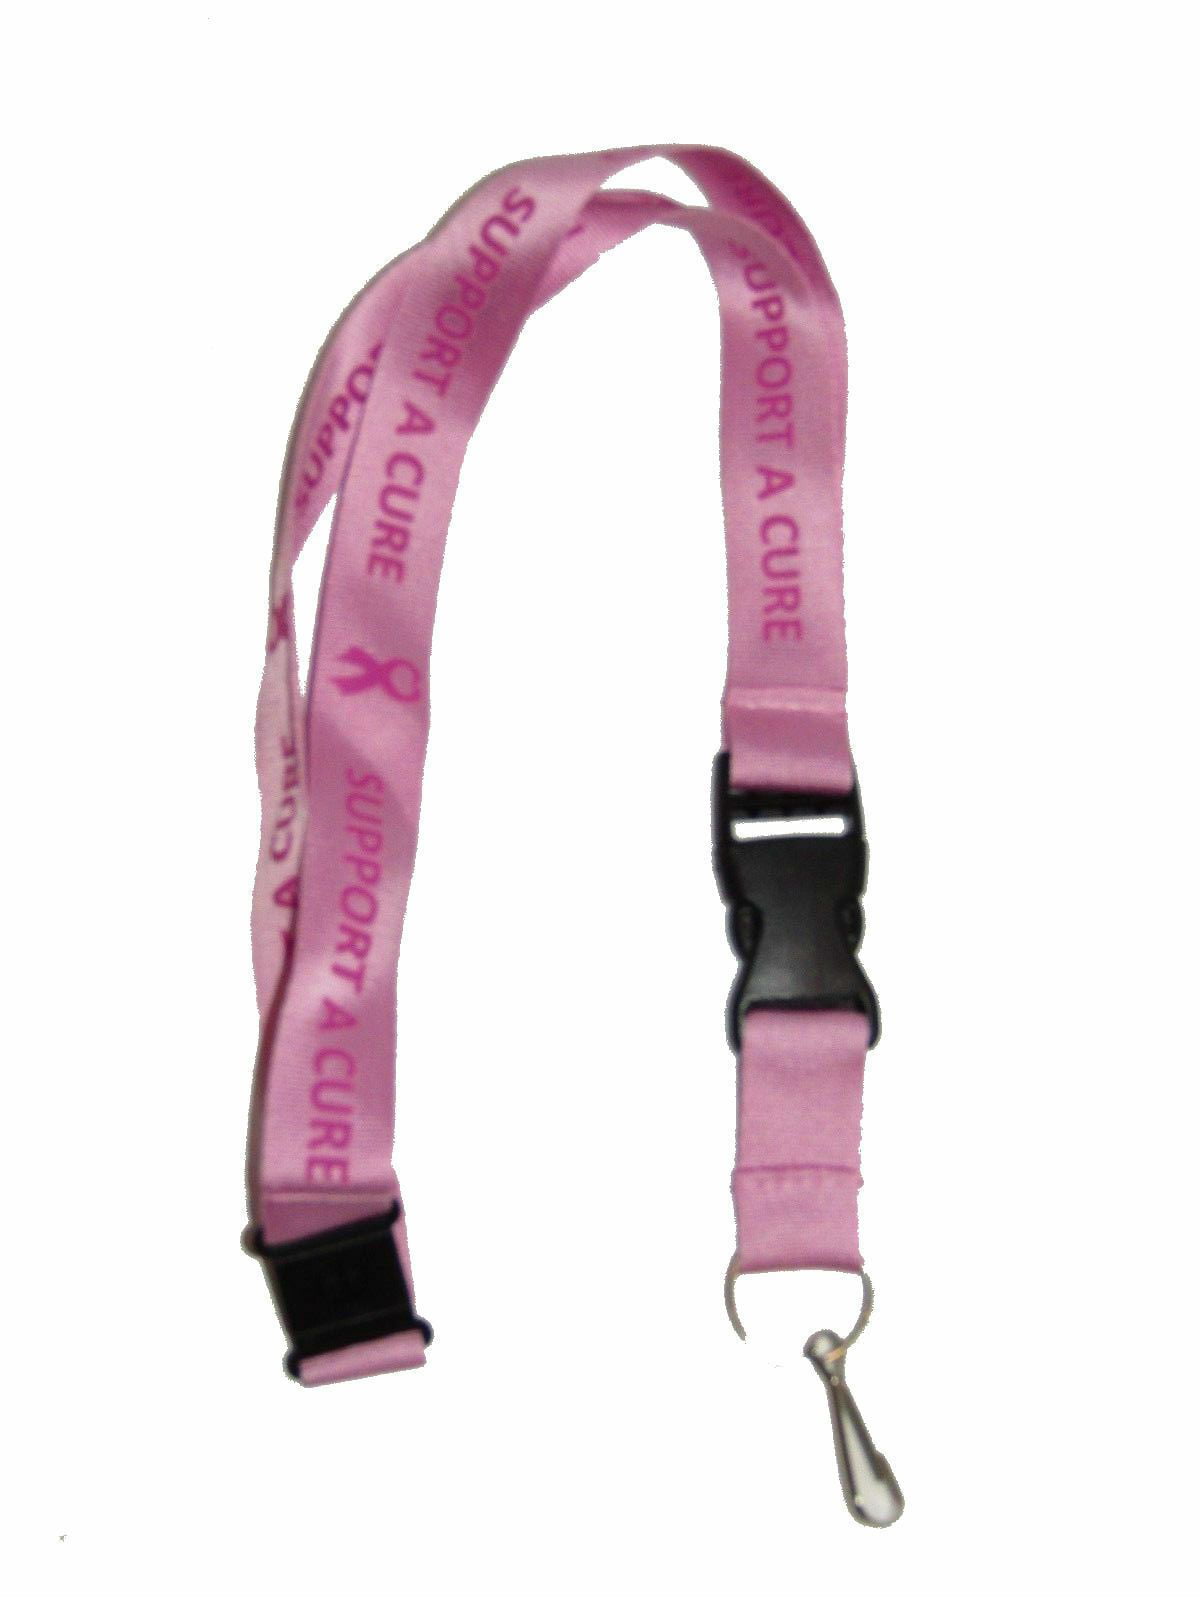 60 PIECES Lanyard Pink Find A Cure Necklaces Breast Cancer Awareness Key Chains 